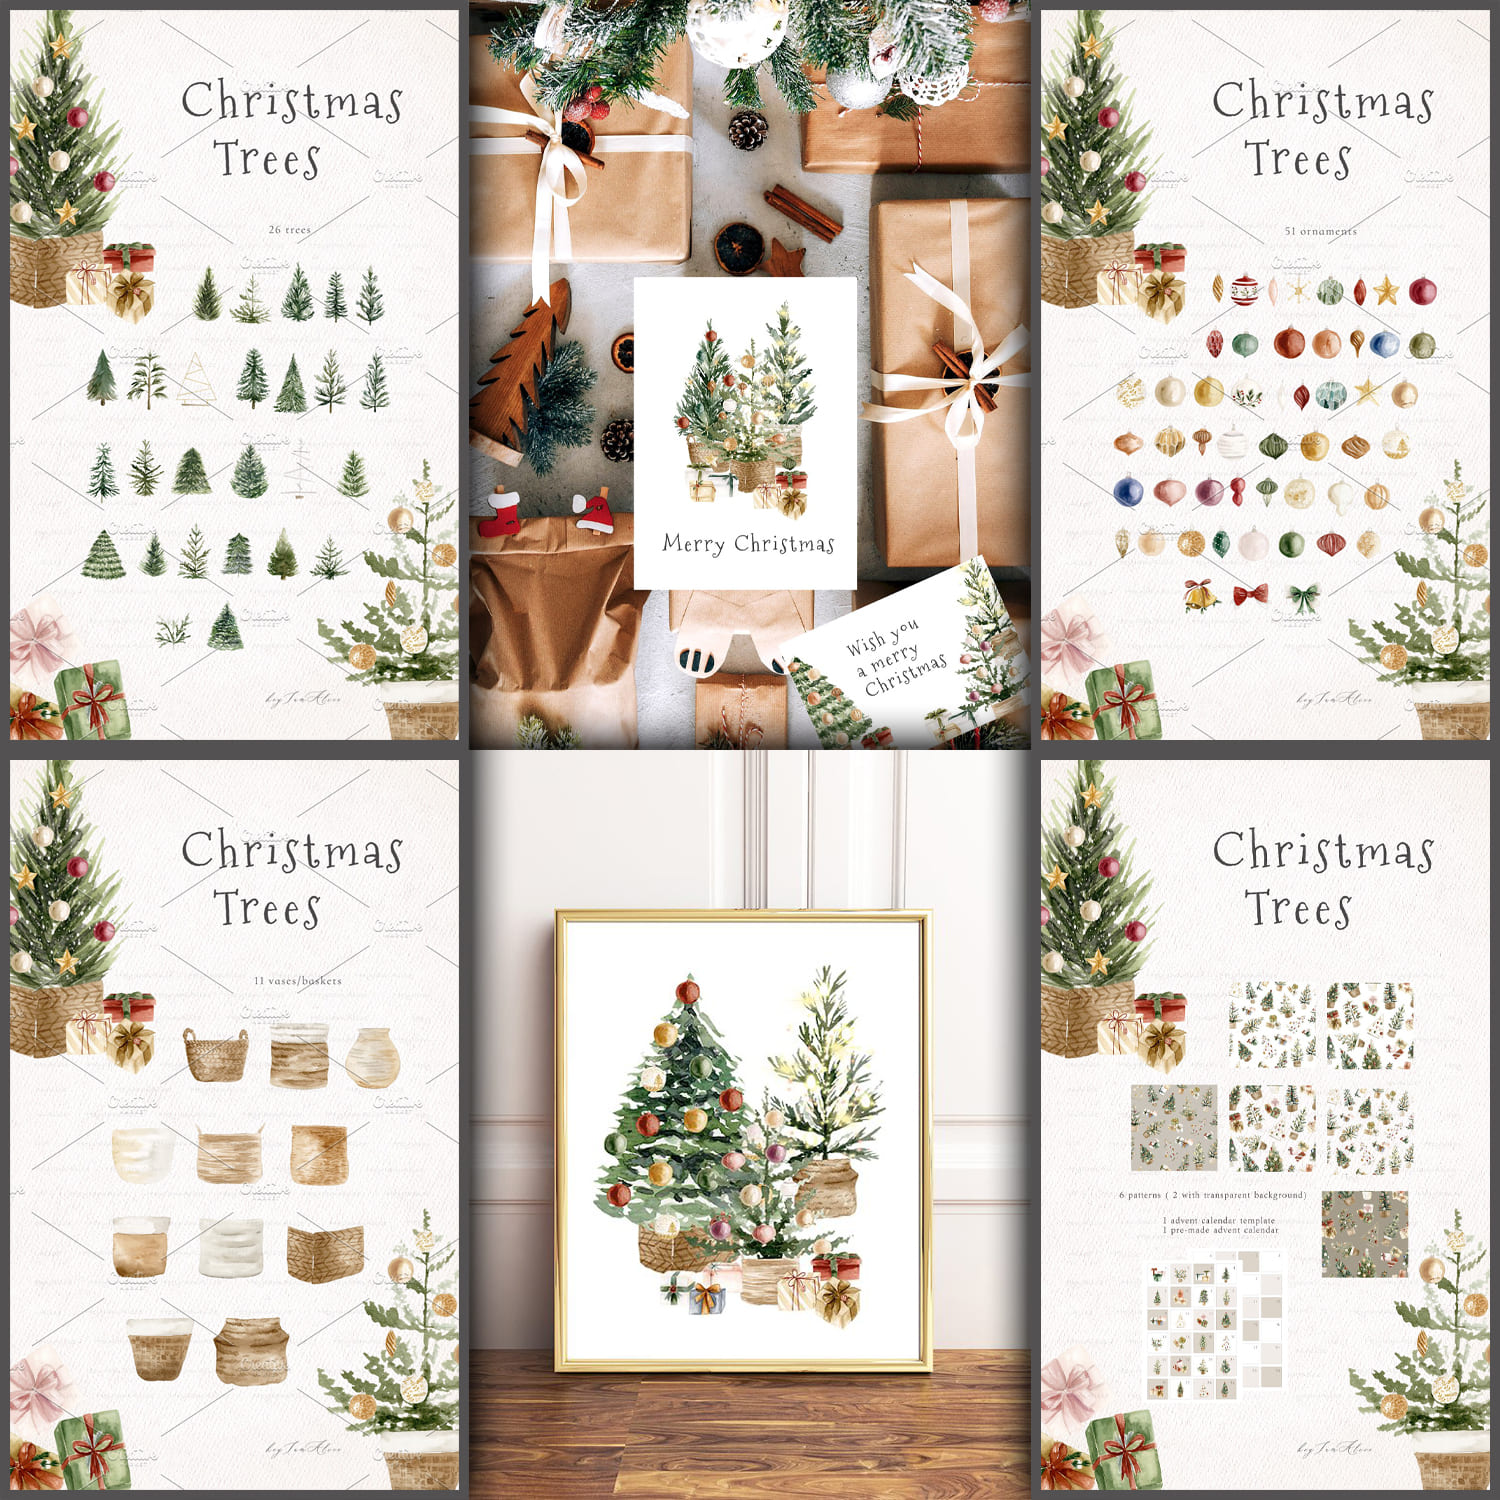 Christmas trees and elements of Christmas.